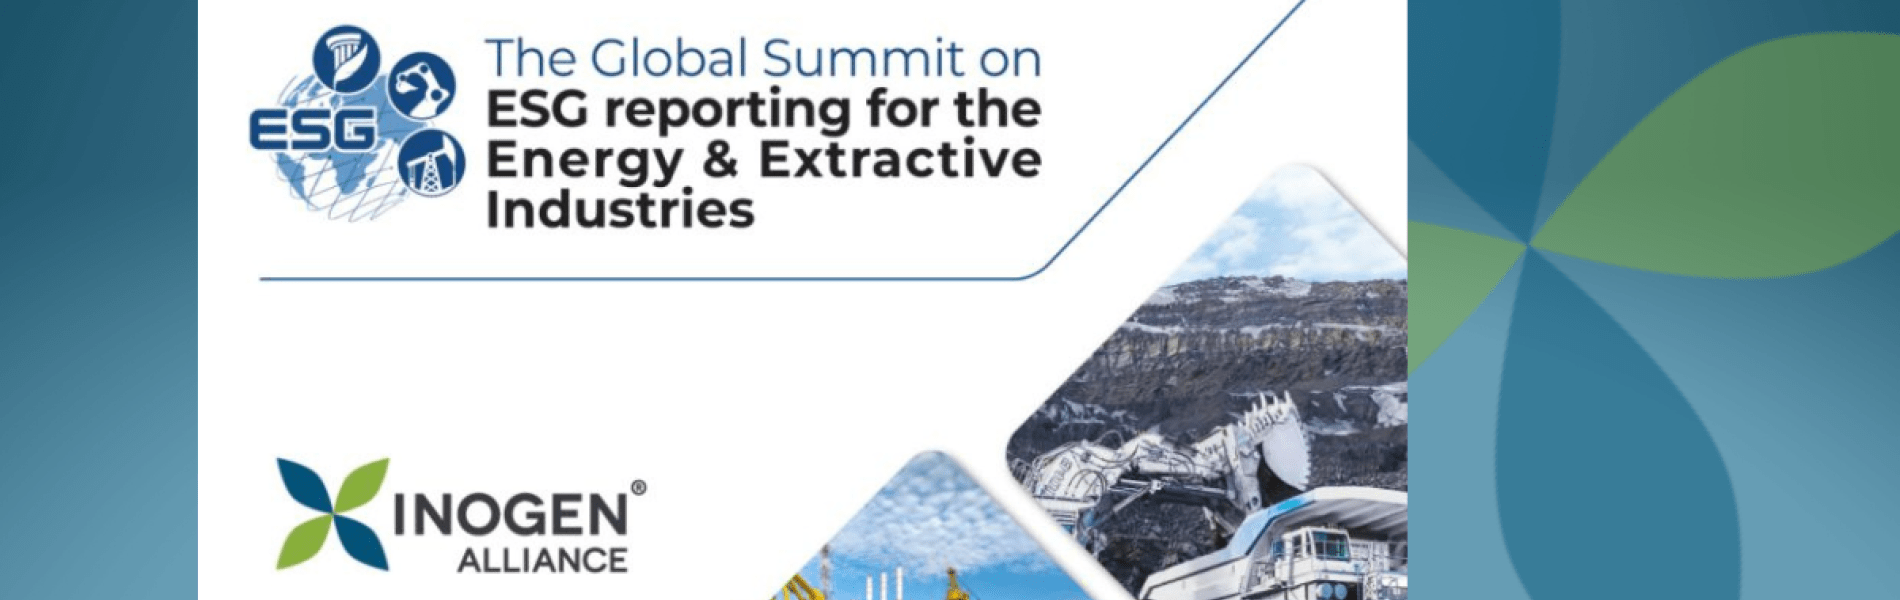 esg reporting for energy & extractive industries